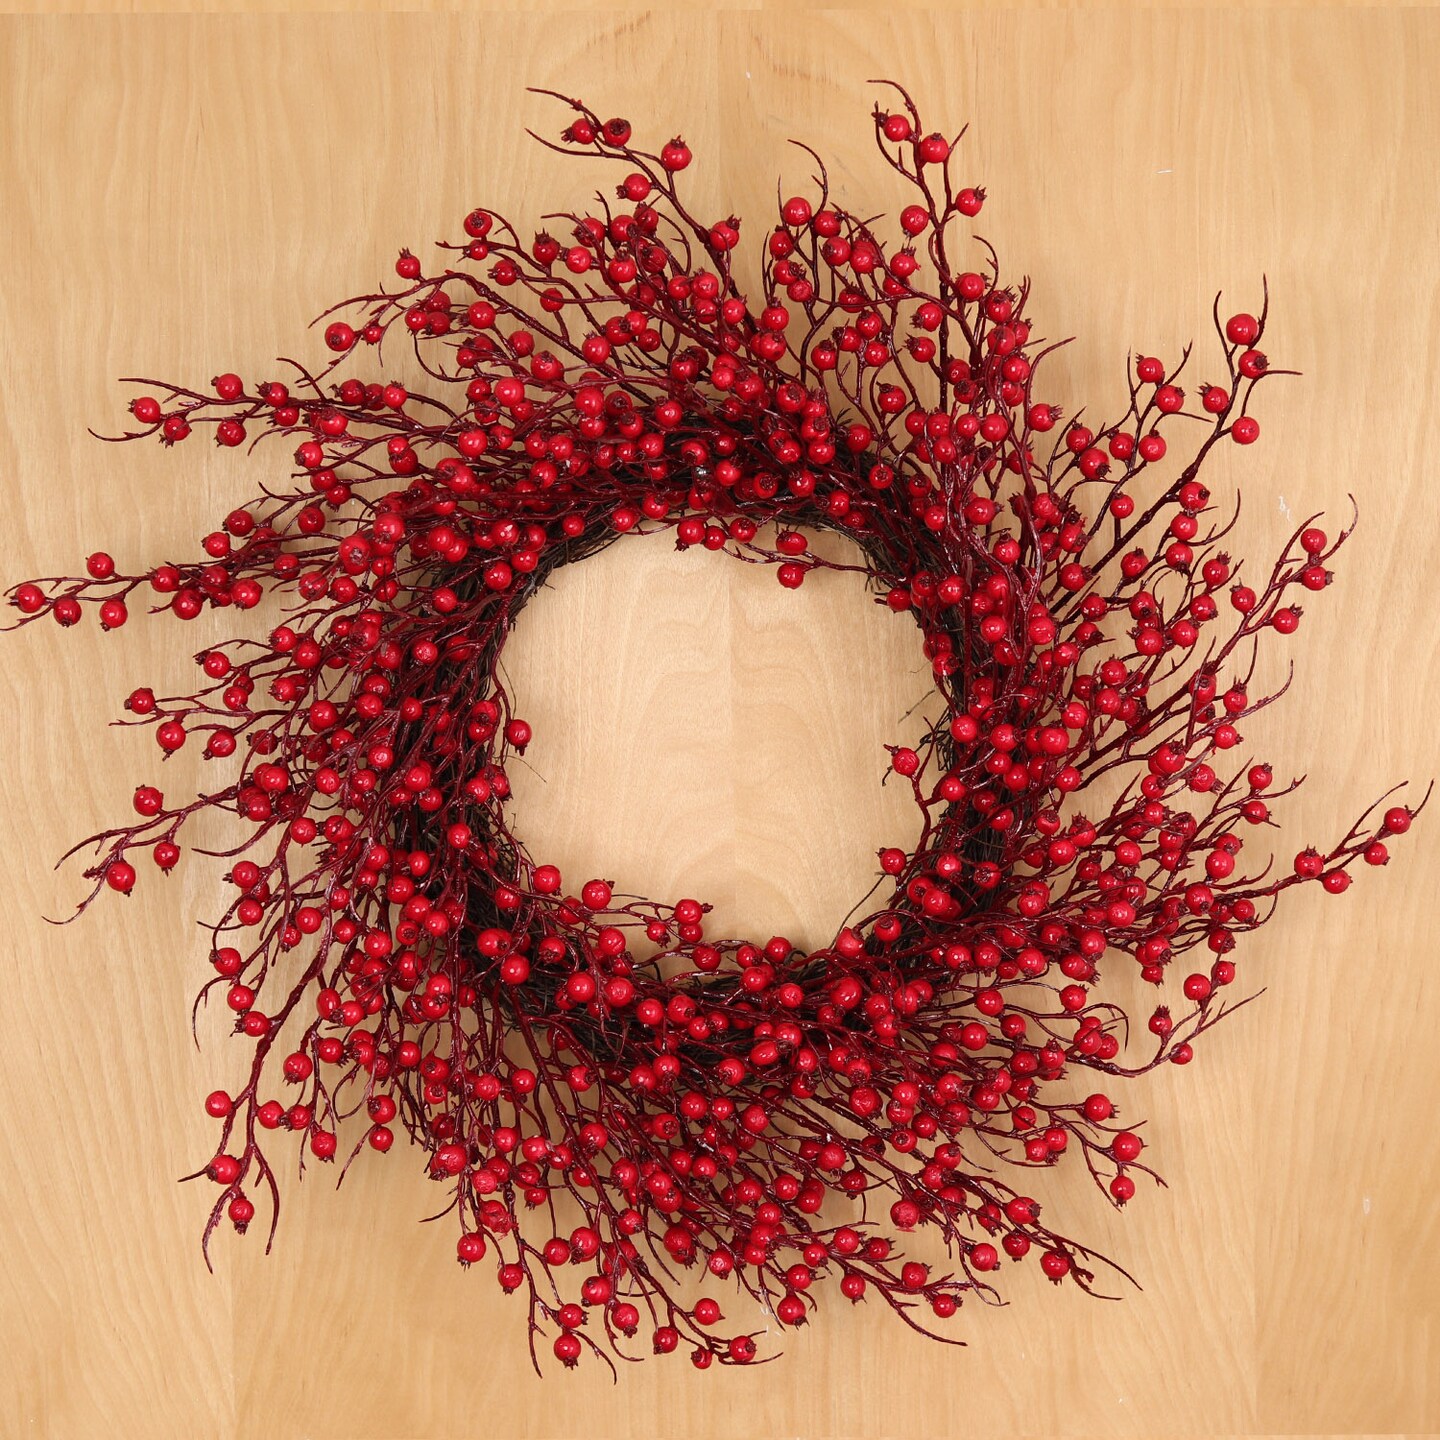 22&#x22; Vibrant Red Rosehip Berry Wreath with Realistic Berries, Indoor/Outdoor Use, Festive Holiday Accents, Front Door, Winter, Home &#x26; Office Decor